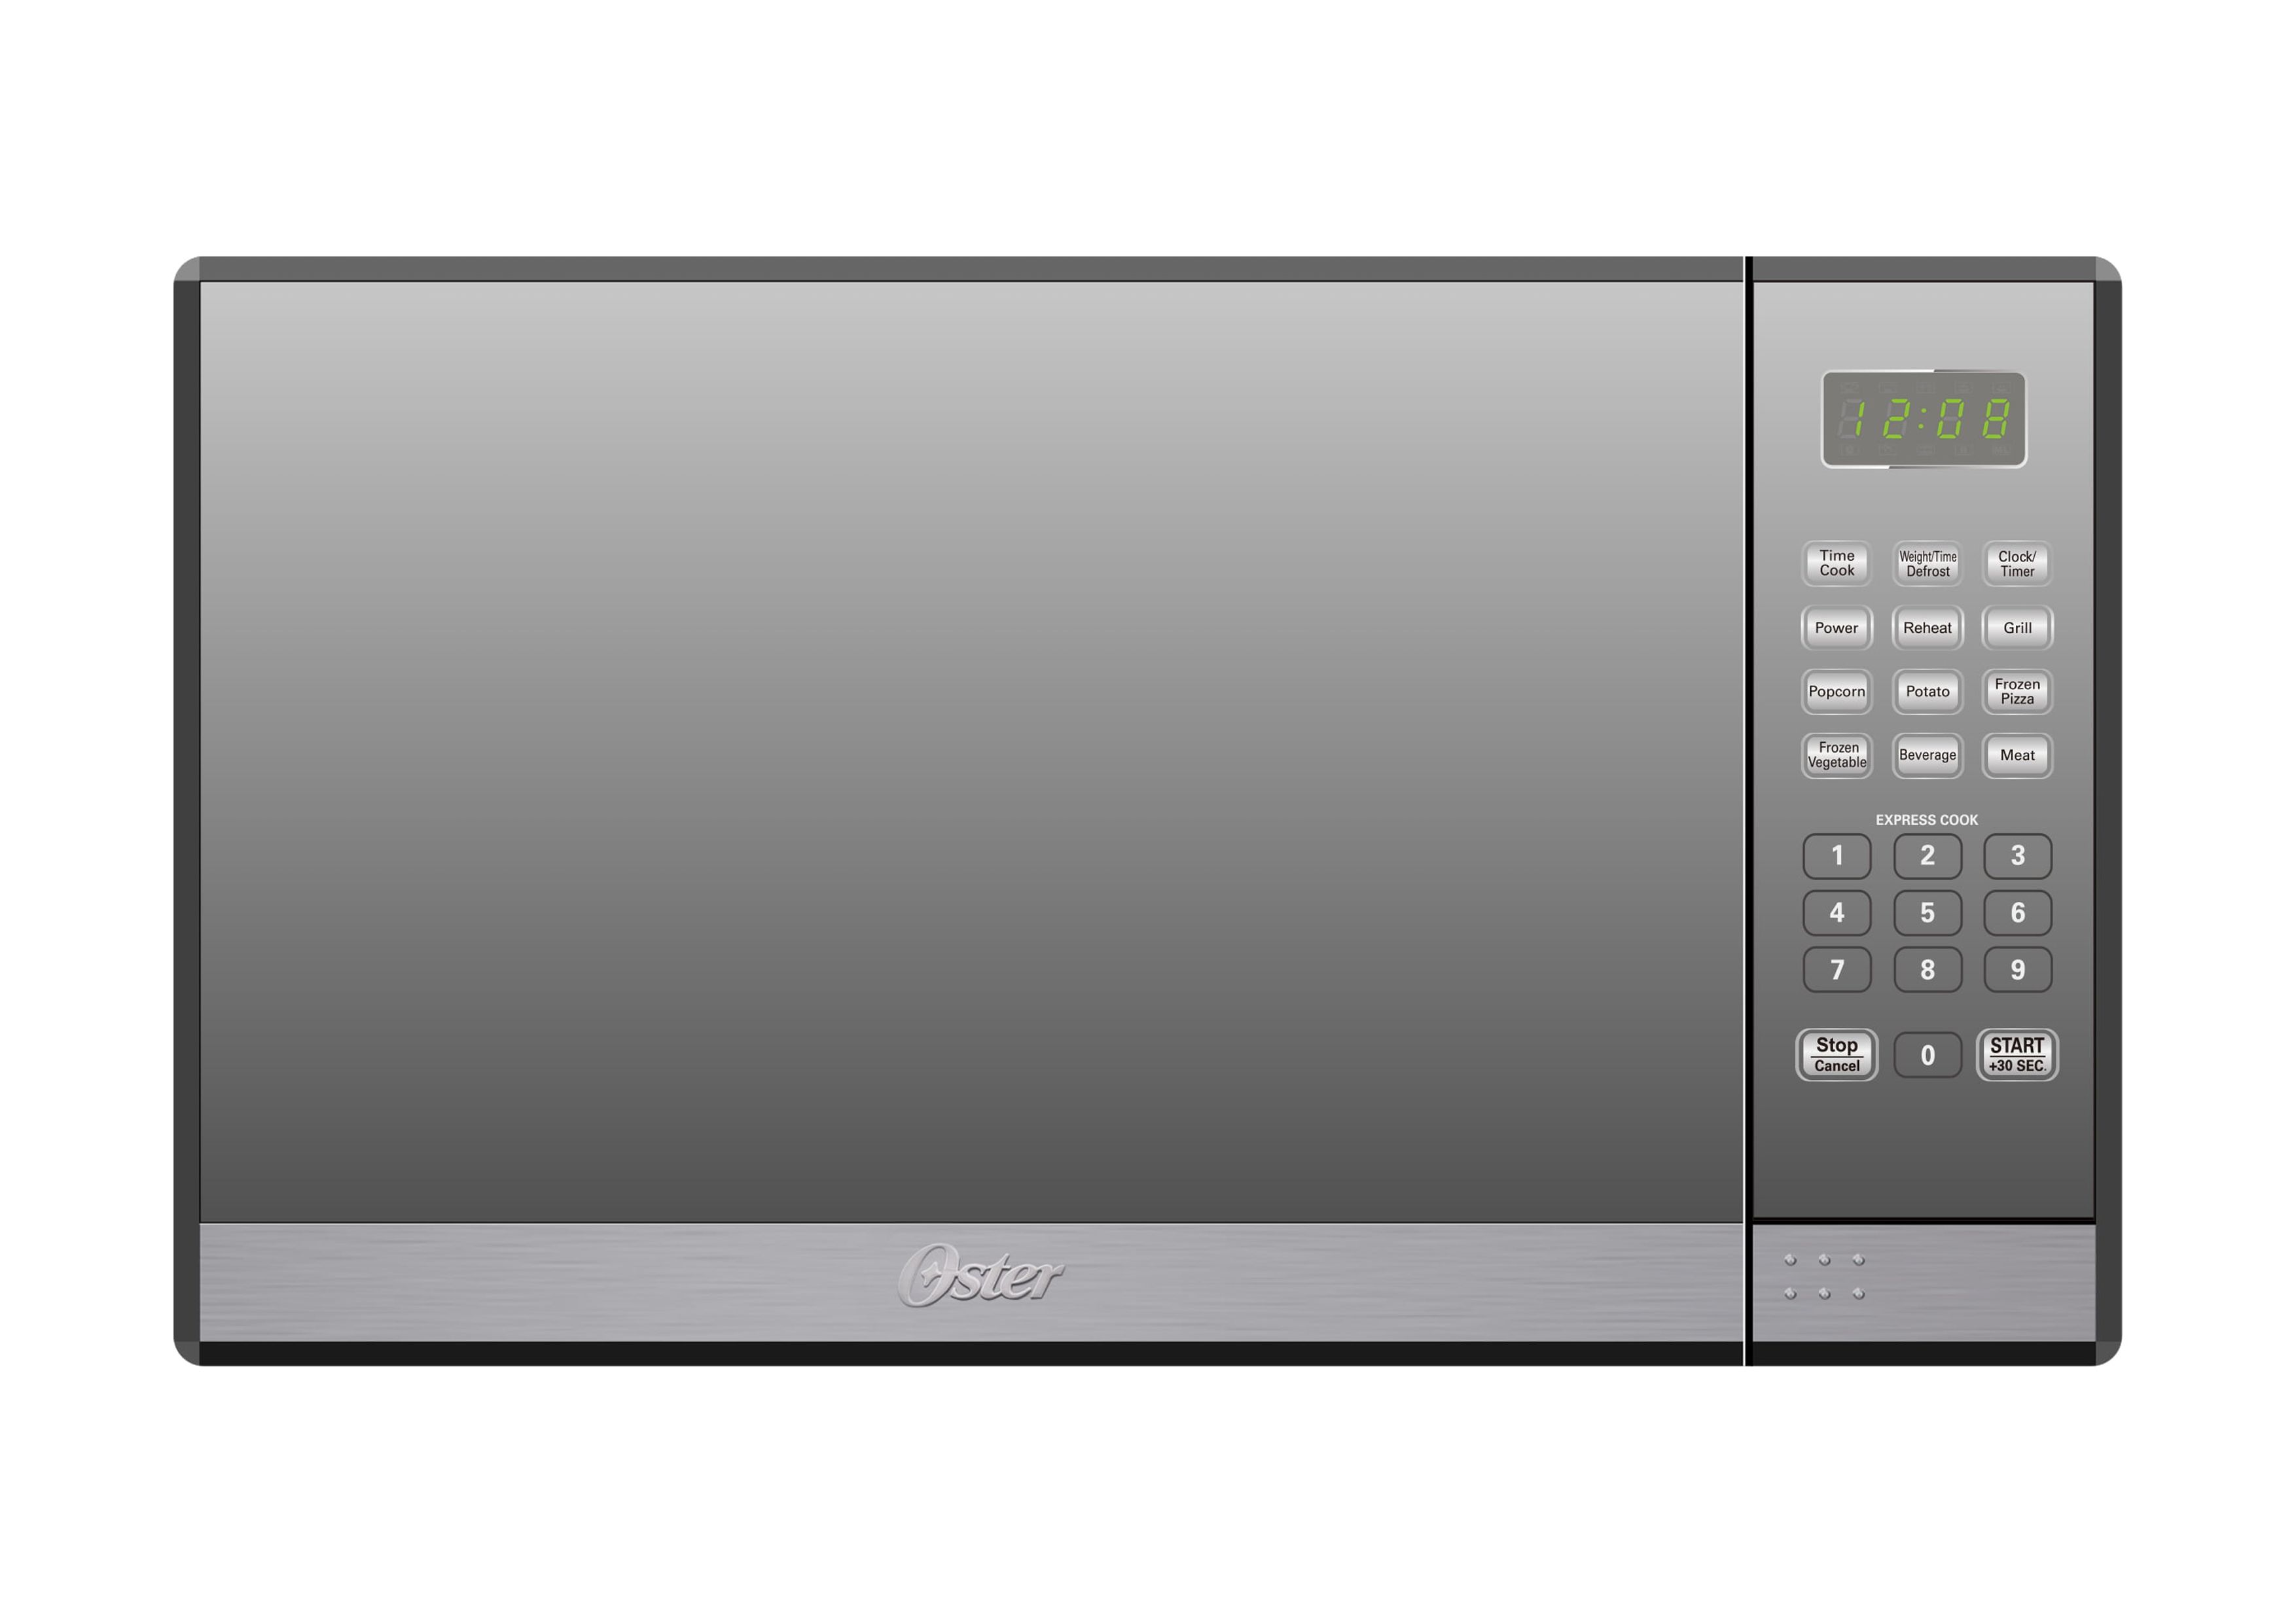 Oster 1.3 Cu. ft. Stainless Steel with Mirror Finish Microwave Oven with Grill - image 4 of 4